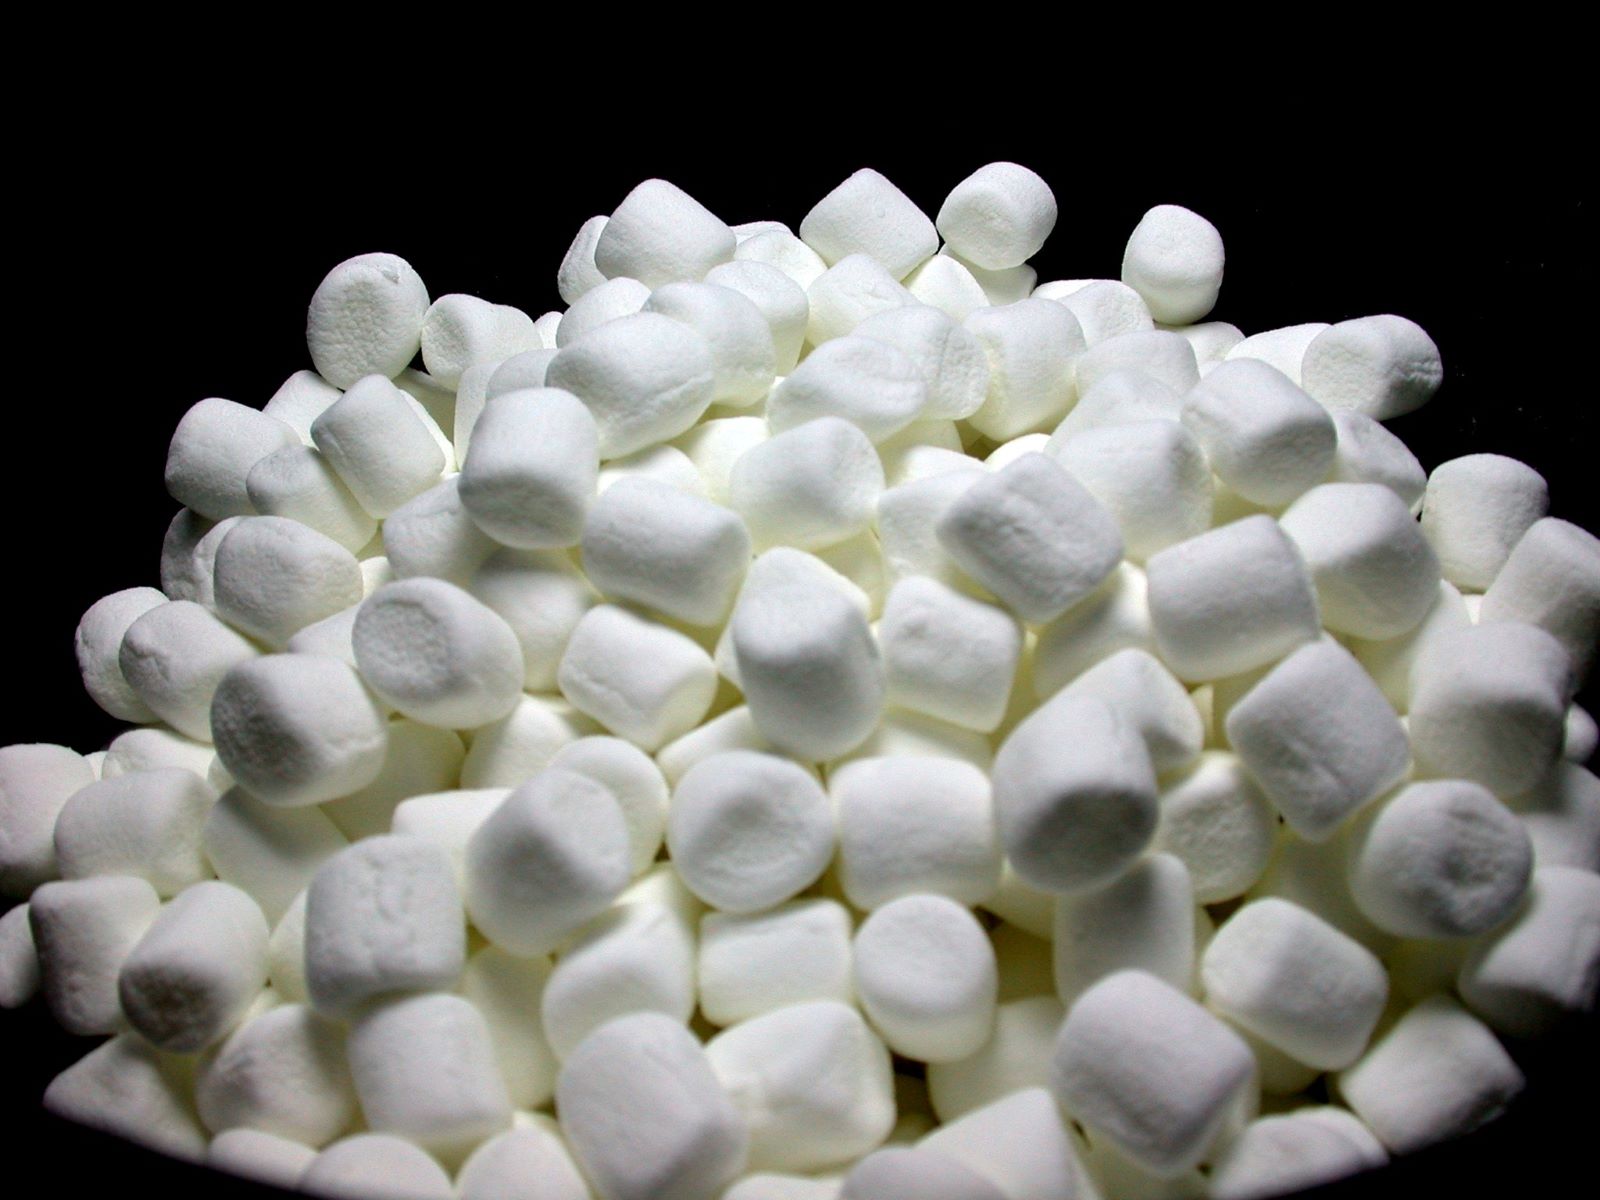 Surprising Discovery: Year-Old Marshmallows Found In Pantry - Are They Still Safe To Eat?